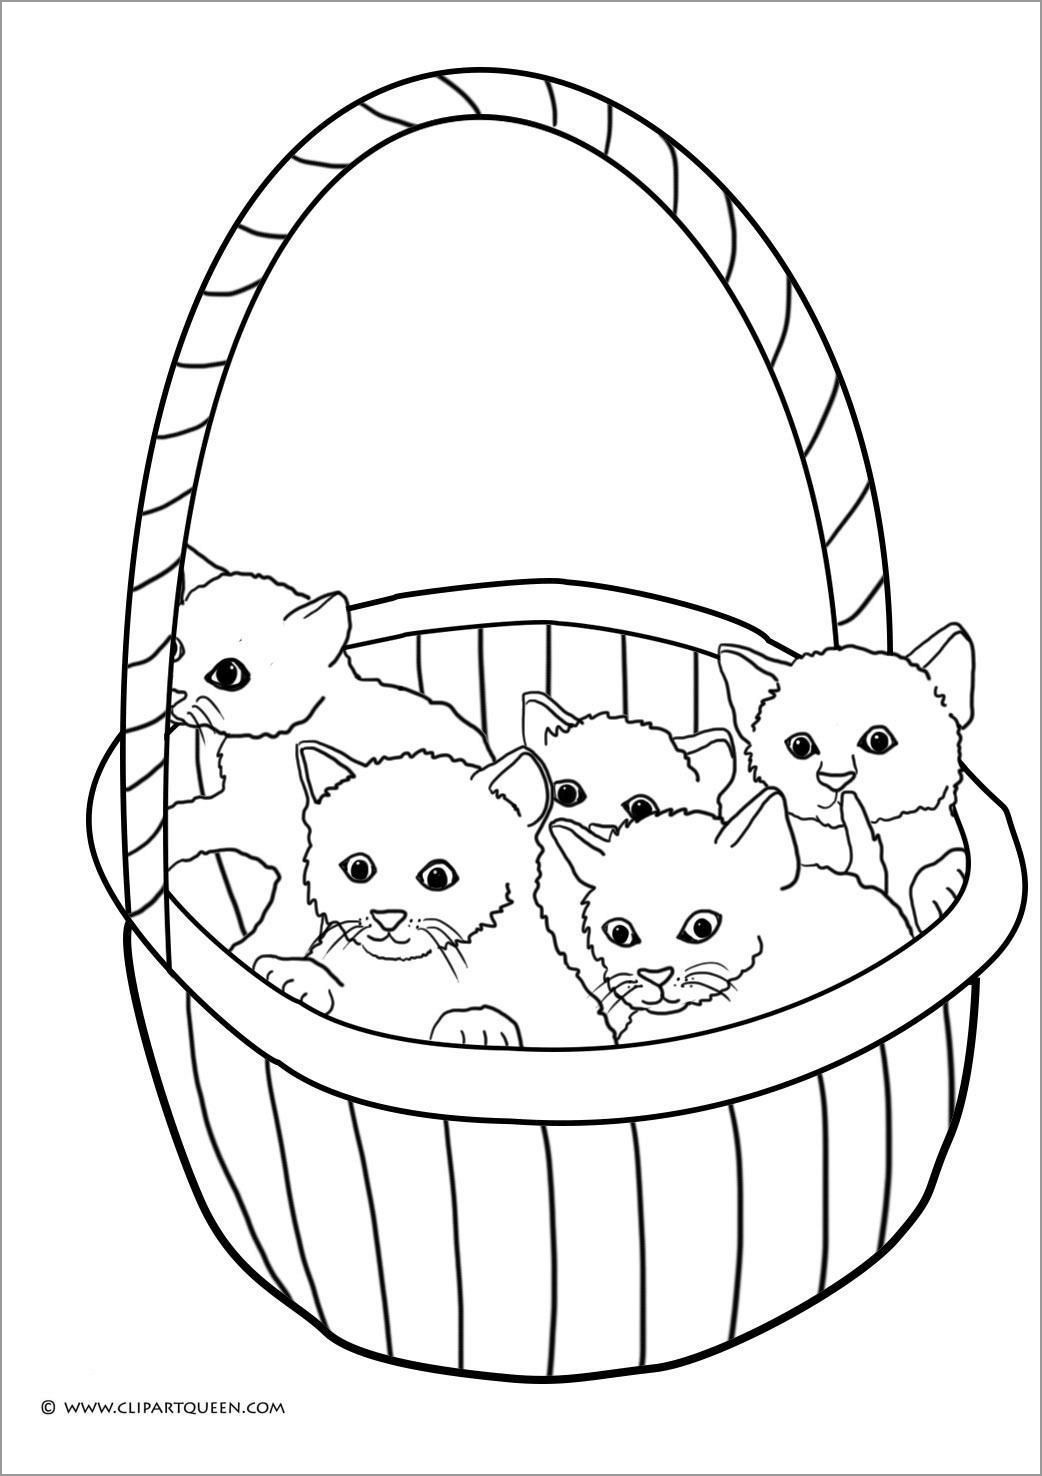 Kitten Coloring Pages for Preschoolers ColoringBay